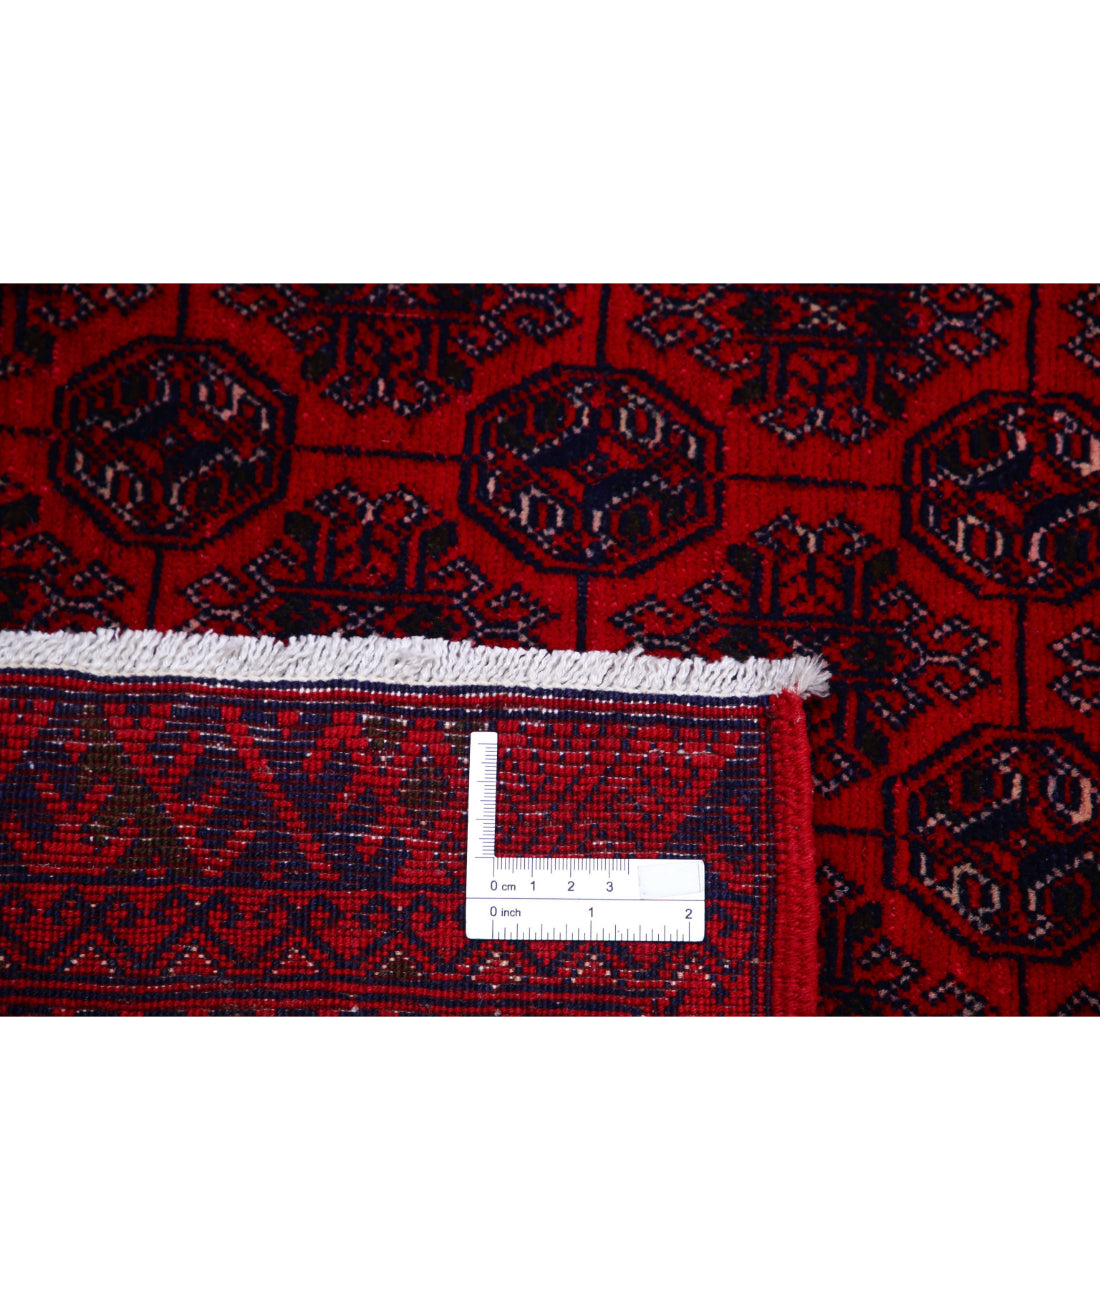 Hand Knotted Afghan Beljik Wool Rug - 6'6'' x 9'6'' 6'6'' x 9'6'' (195 X 285) / Red / Red